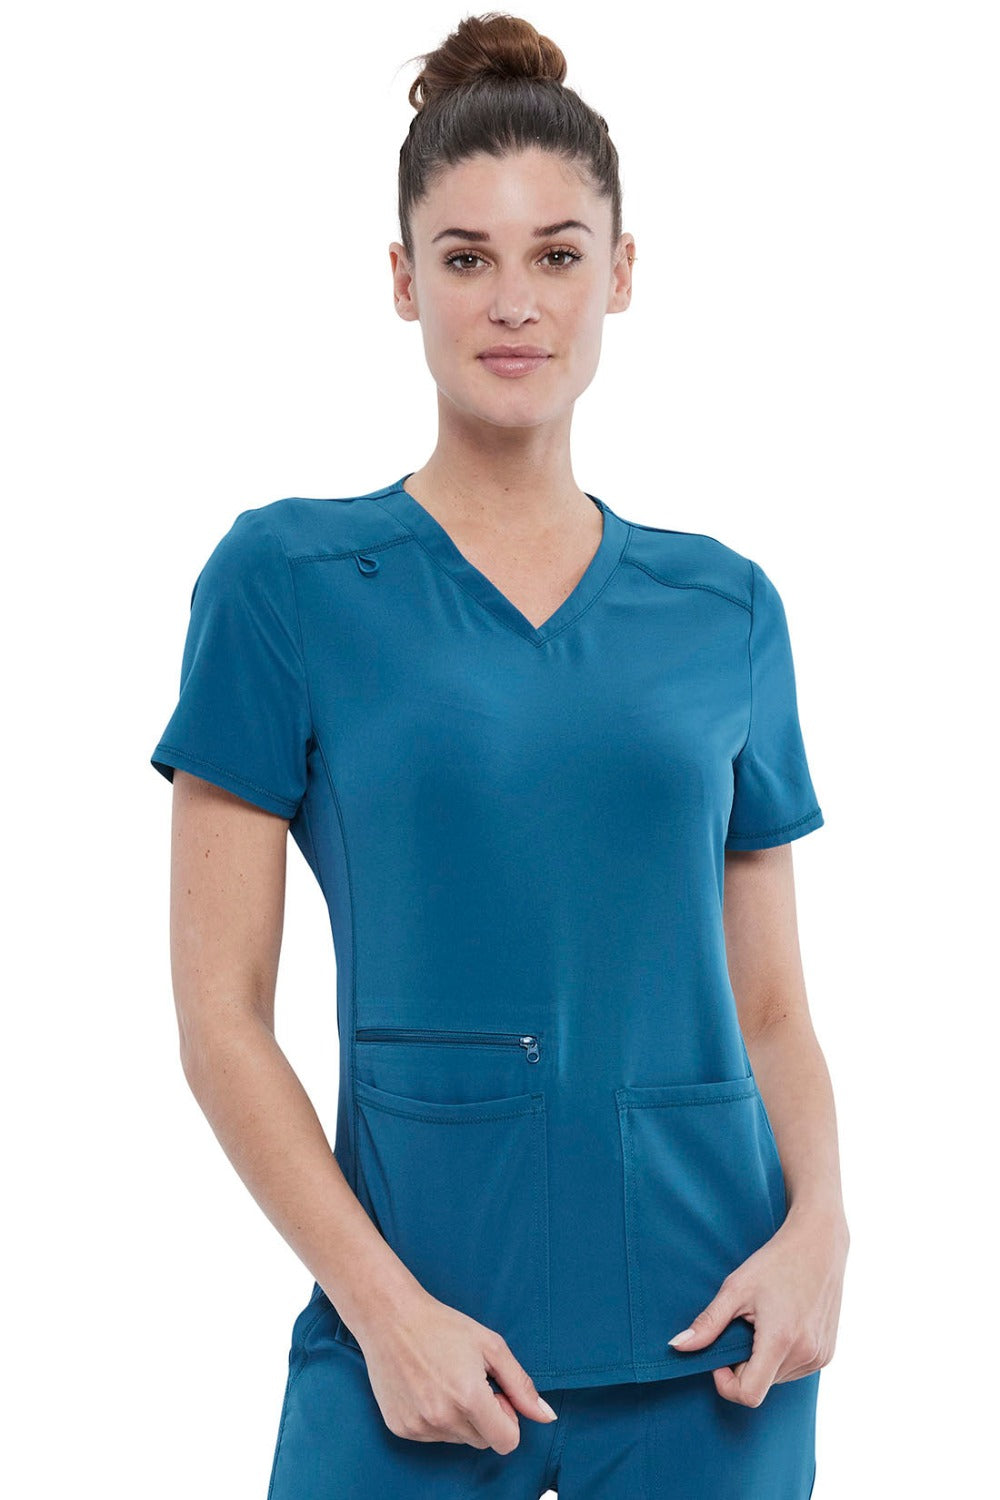 Cherokee Allura V-Neck Scrub Top in Caribbean at Parker's Clothing and Shoes.